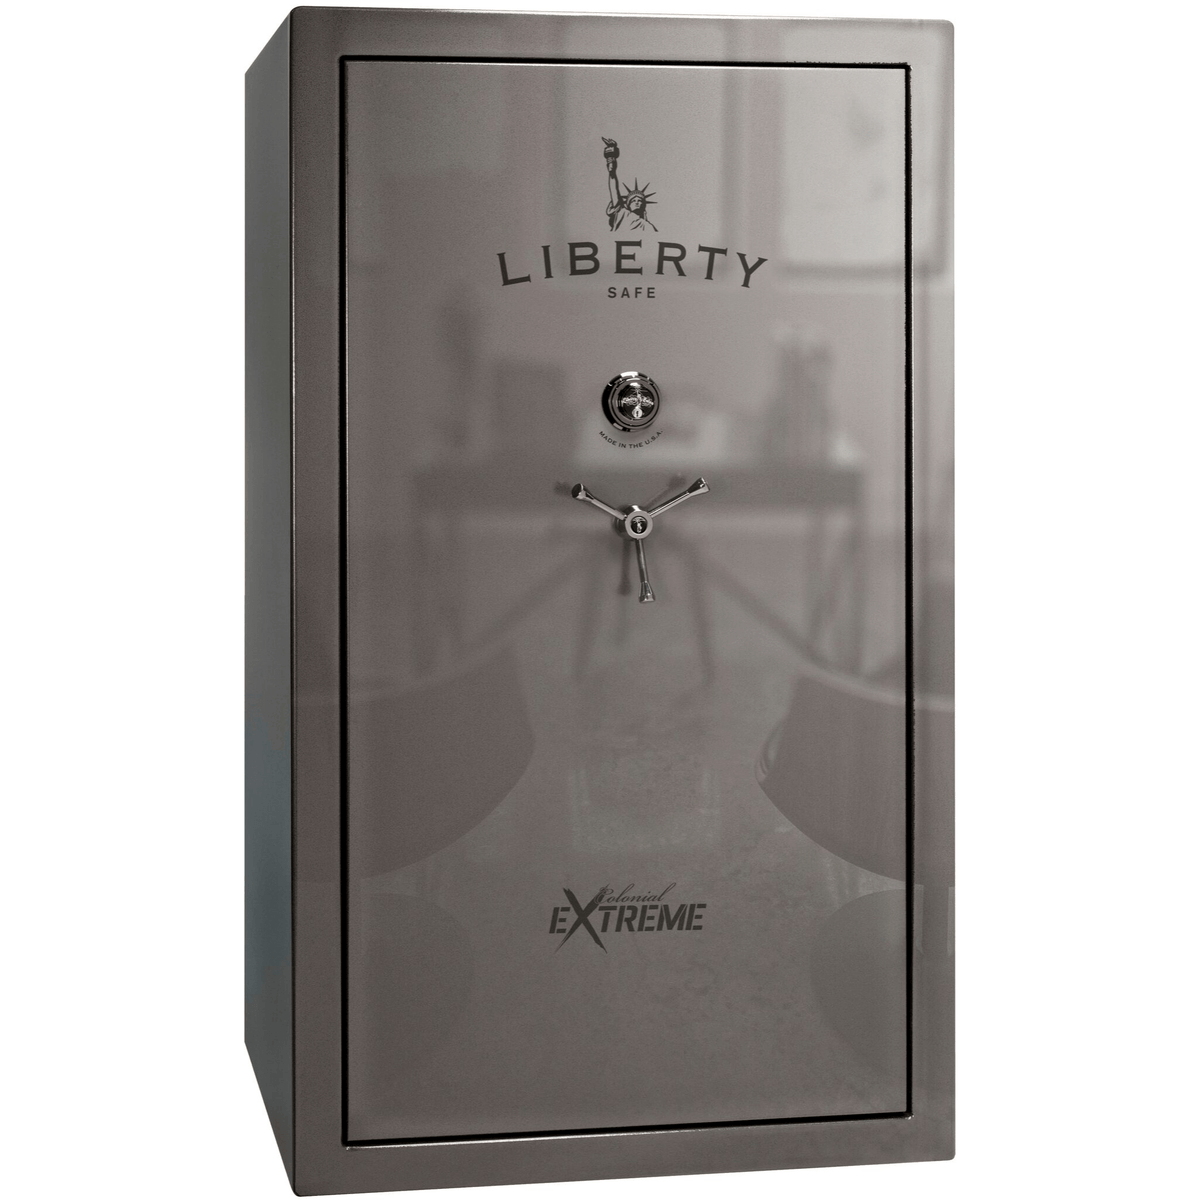 Liberty Colonial 50 Extreme Safe in Gray Gloss with Black Chrome Mechanical Lock.